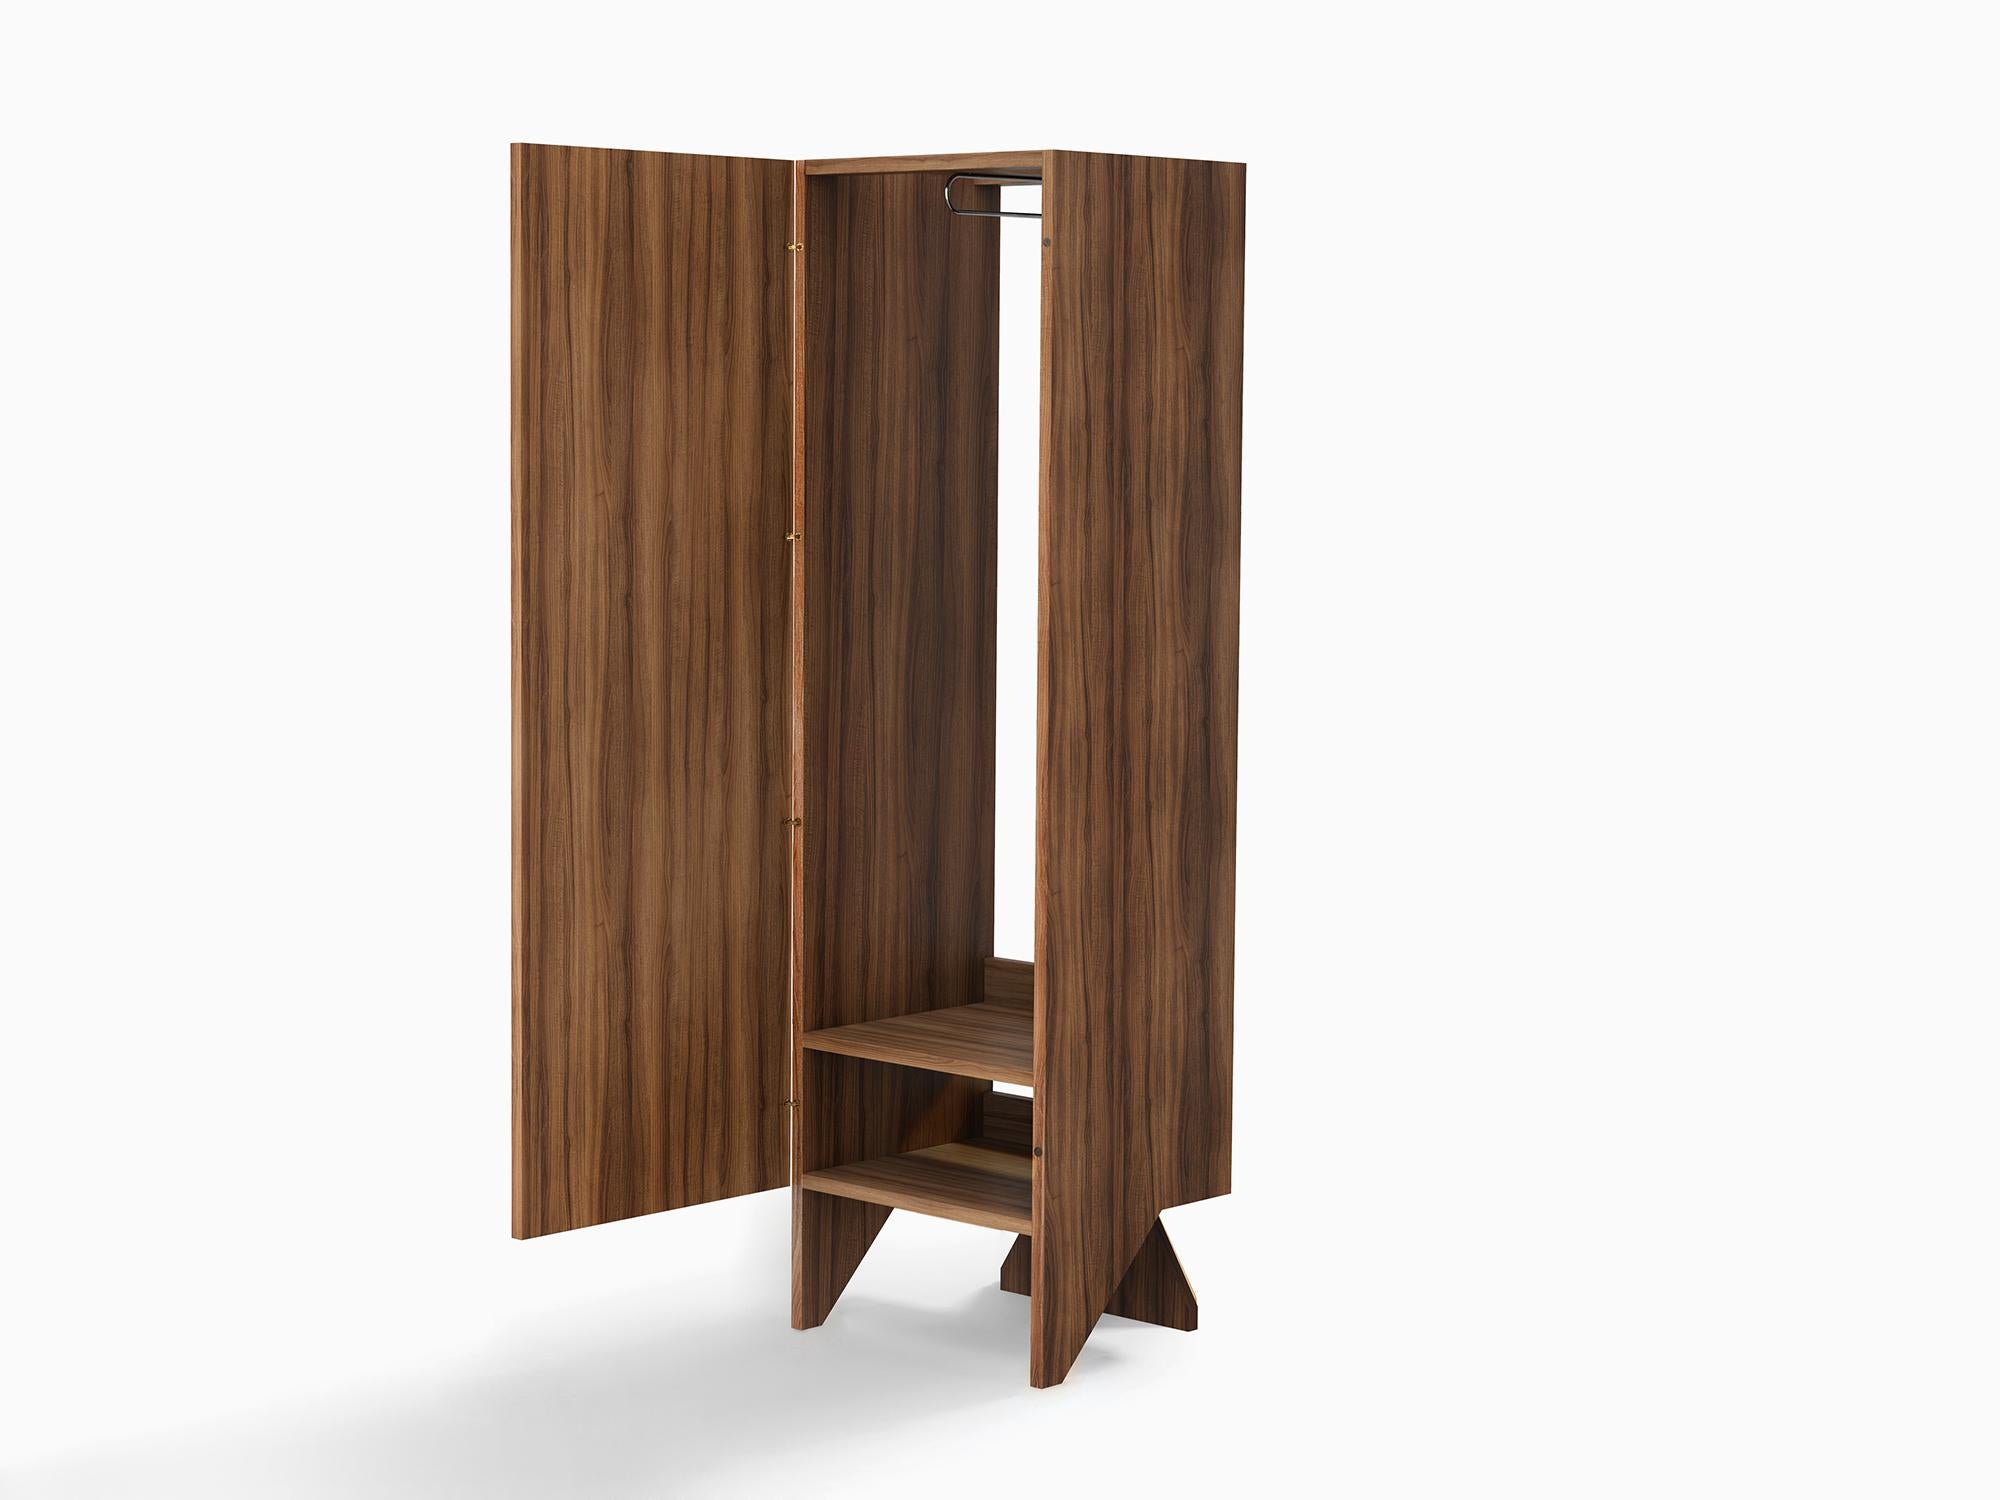 Don't miss your chance to own this exceptional piece designed by the renowned architect Álvaro Siza Vieira. The ALFAMA wardrobe is truly one of a kind and will never be produced again. 

A key element for modern living is an efficient use of space.